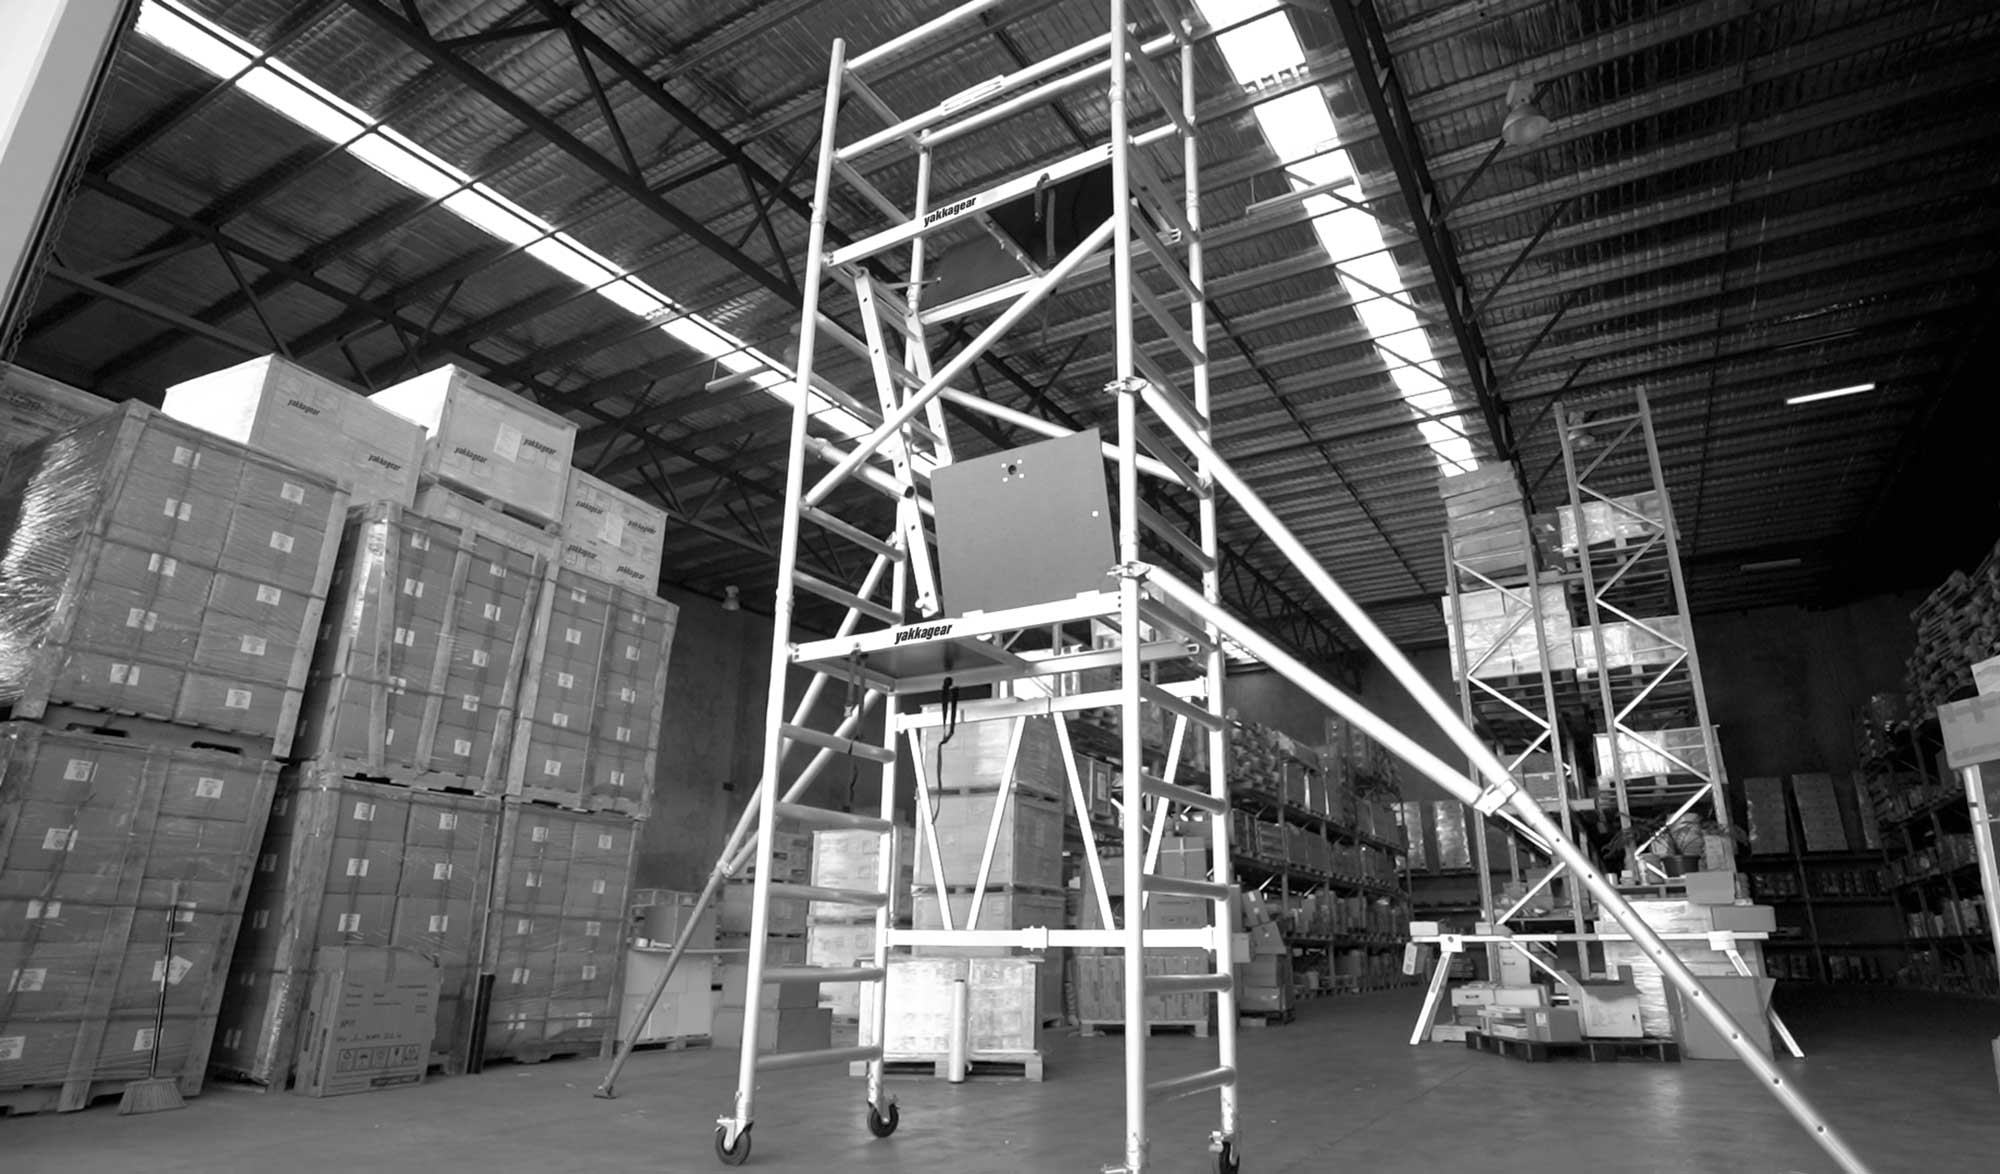 Yakka Gear Australia compact scaffolding tower as access equipment, including the Base Unit, Extension Unit, Tower Unit, and Adjustable Wheels. 1.44m Length x 0.74m Width, with working platform height of 3.9m and reach up to 6m high. View from the front side angle set up in the warehouse.